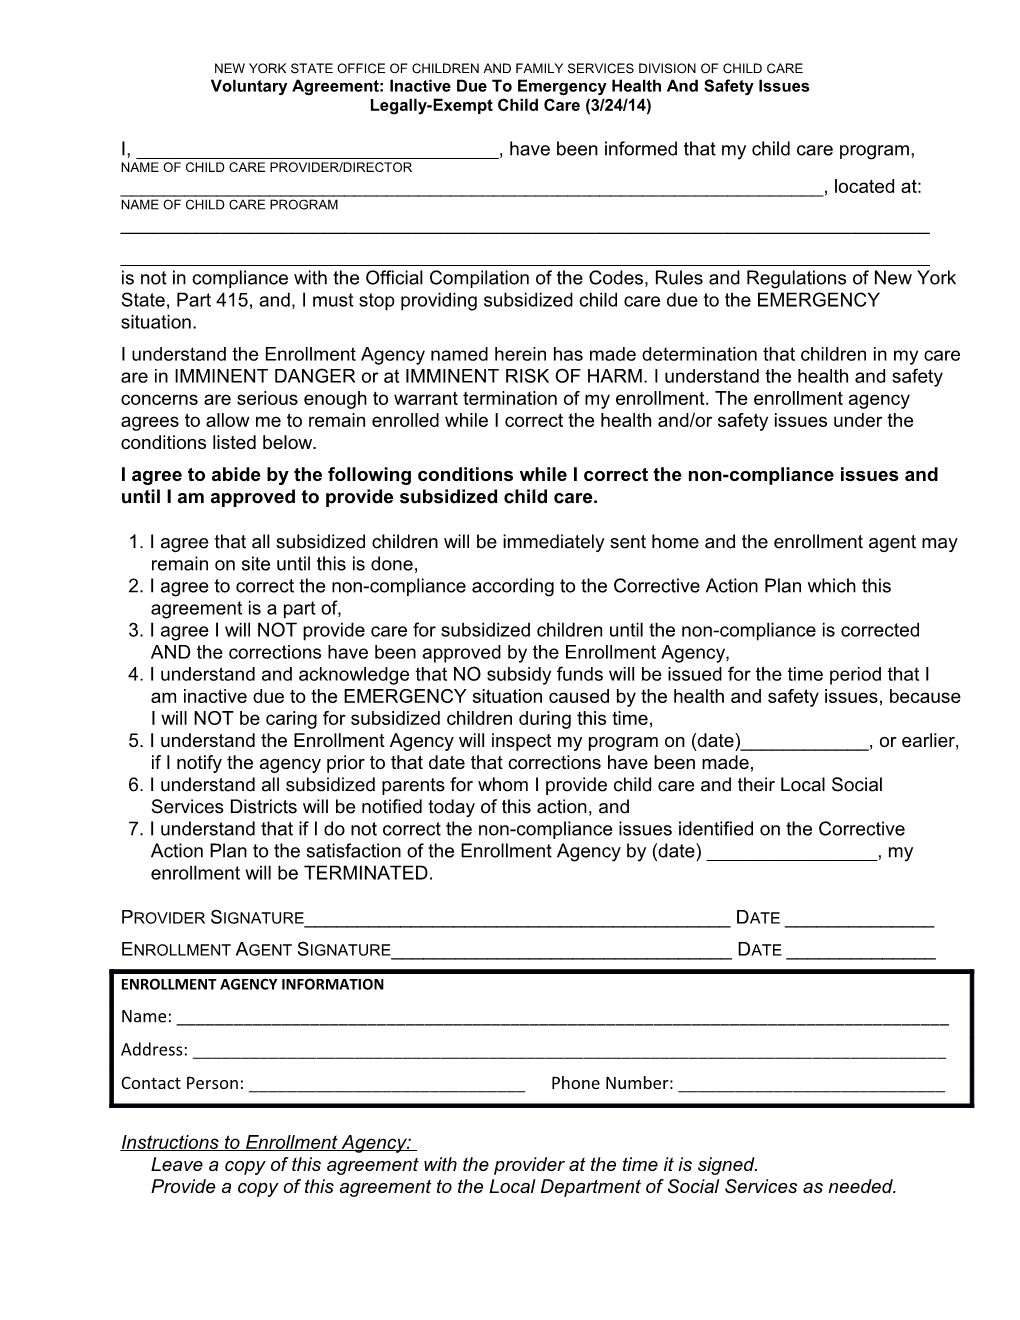 Leave a Copy of This Agreement with the Provider at the Time It Is Signed